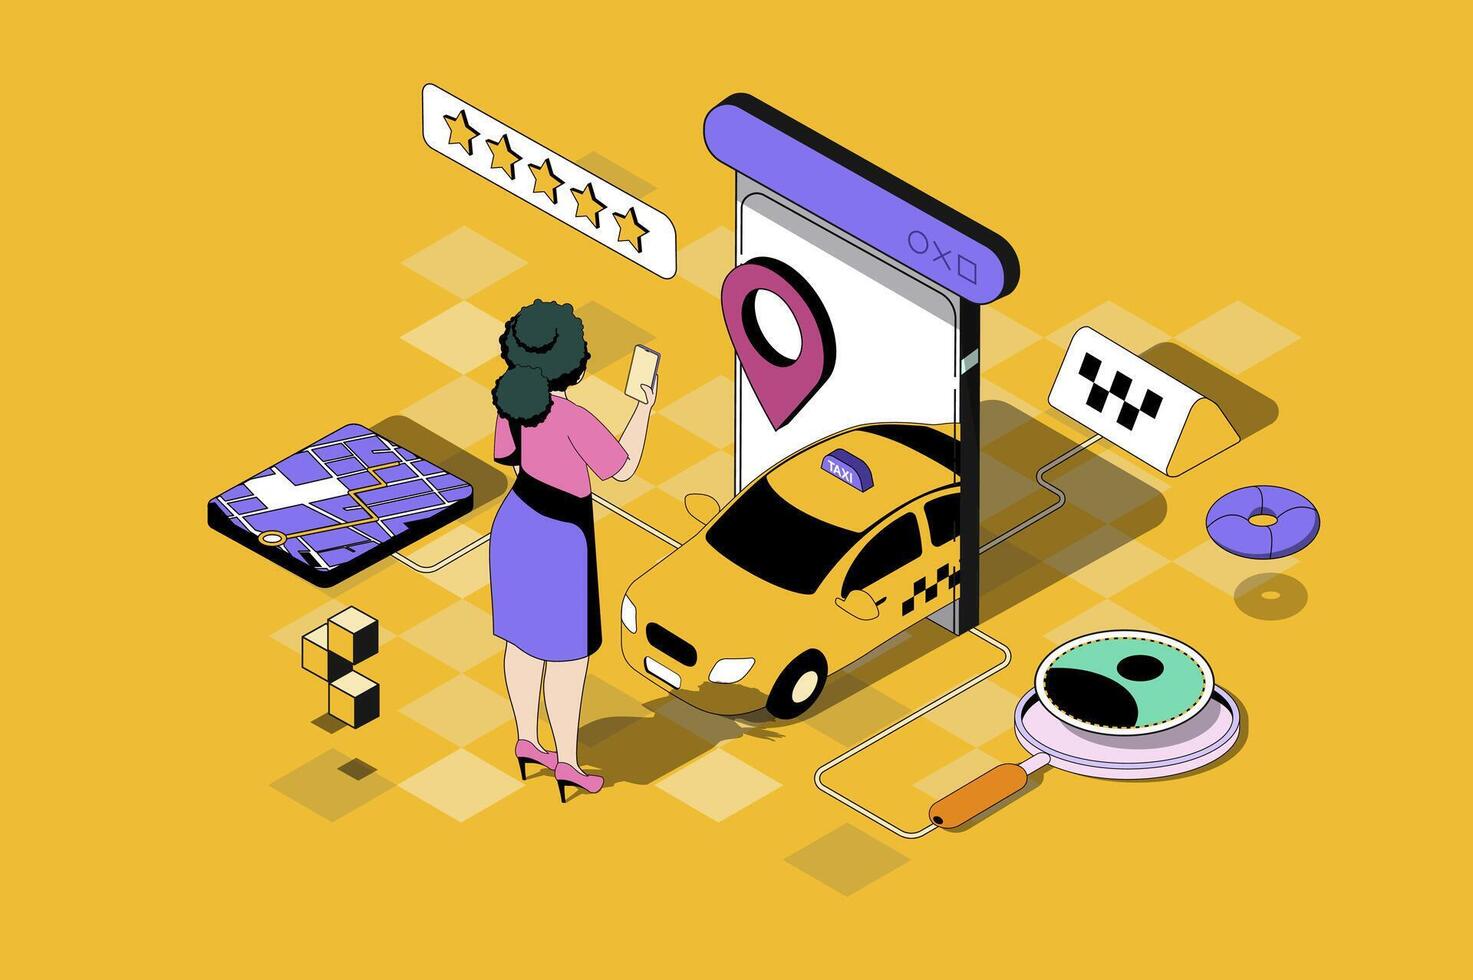 Taxi booking web concept in 3d isometric design. Woman holding smartphone with taxi application, ordering car with top rating and tracking online. web illustration with people isometry scene vector